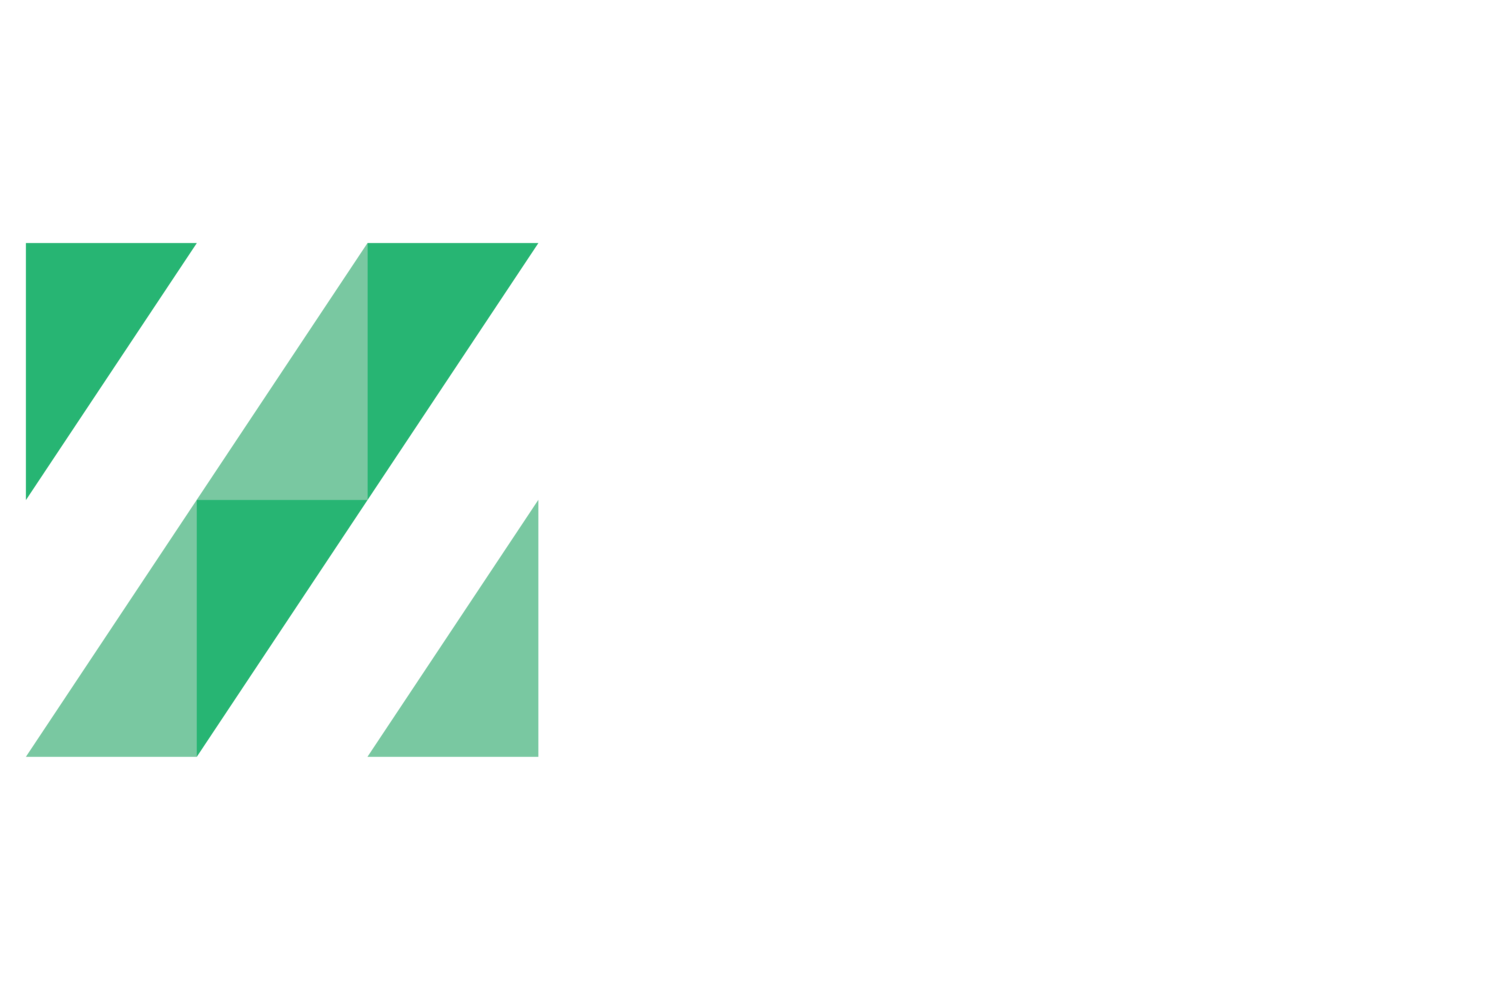 Zeal Accounting Solutions